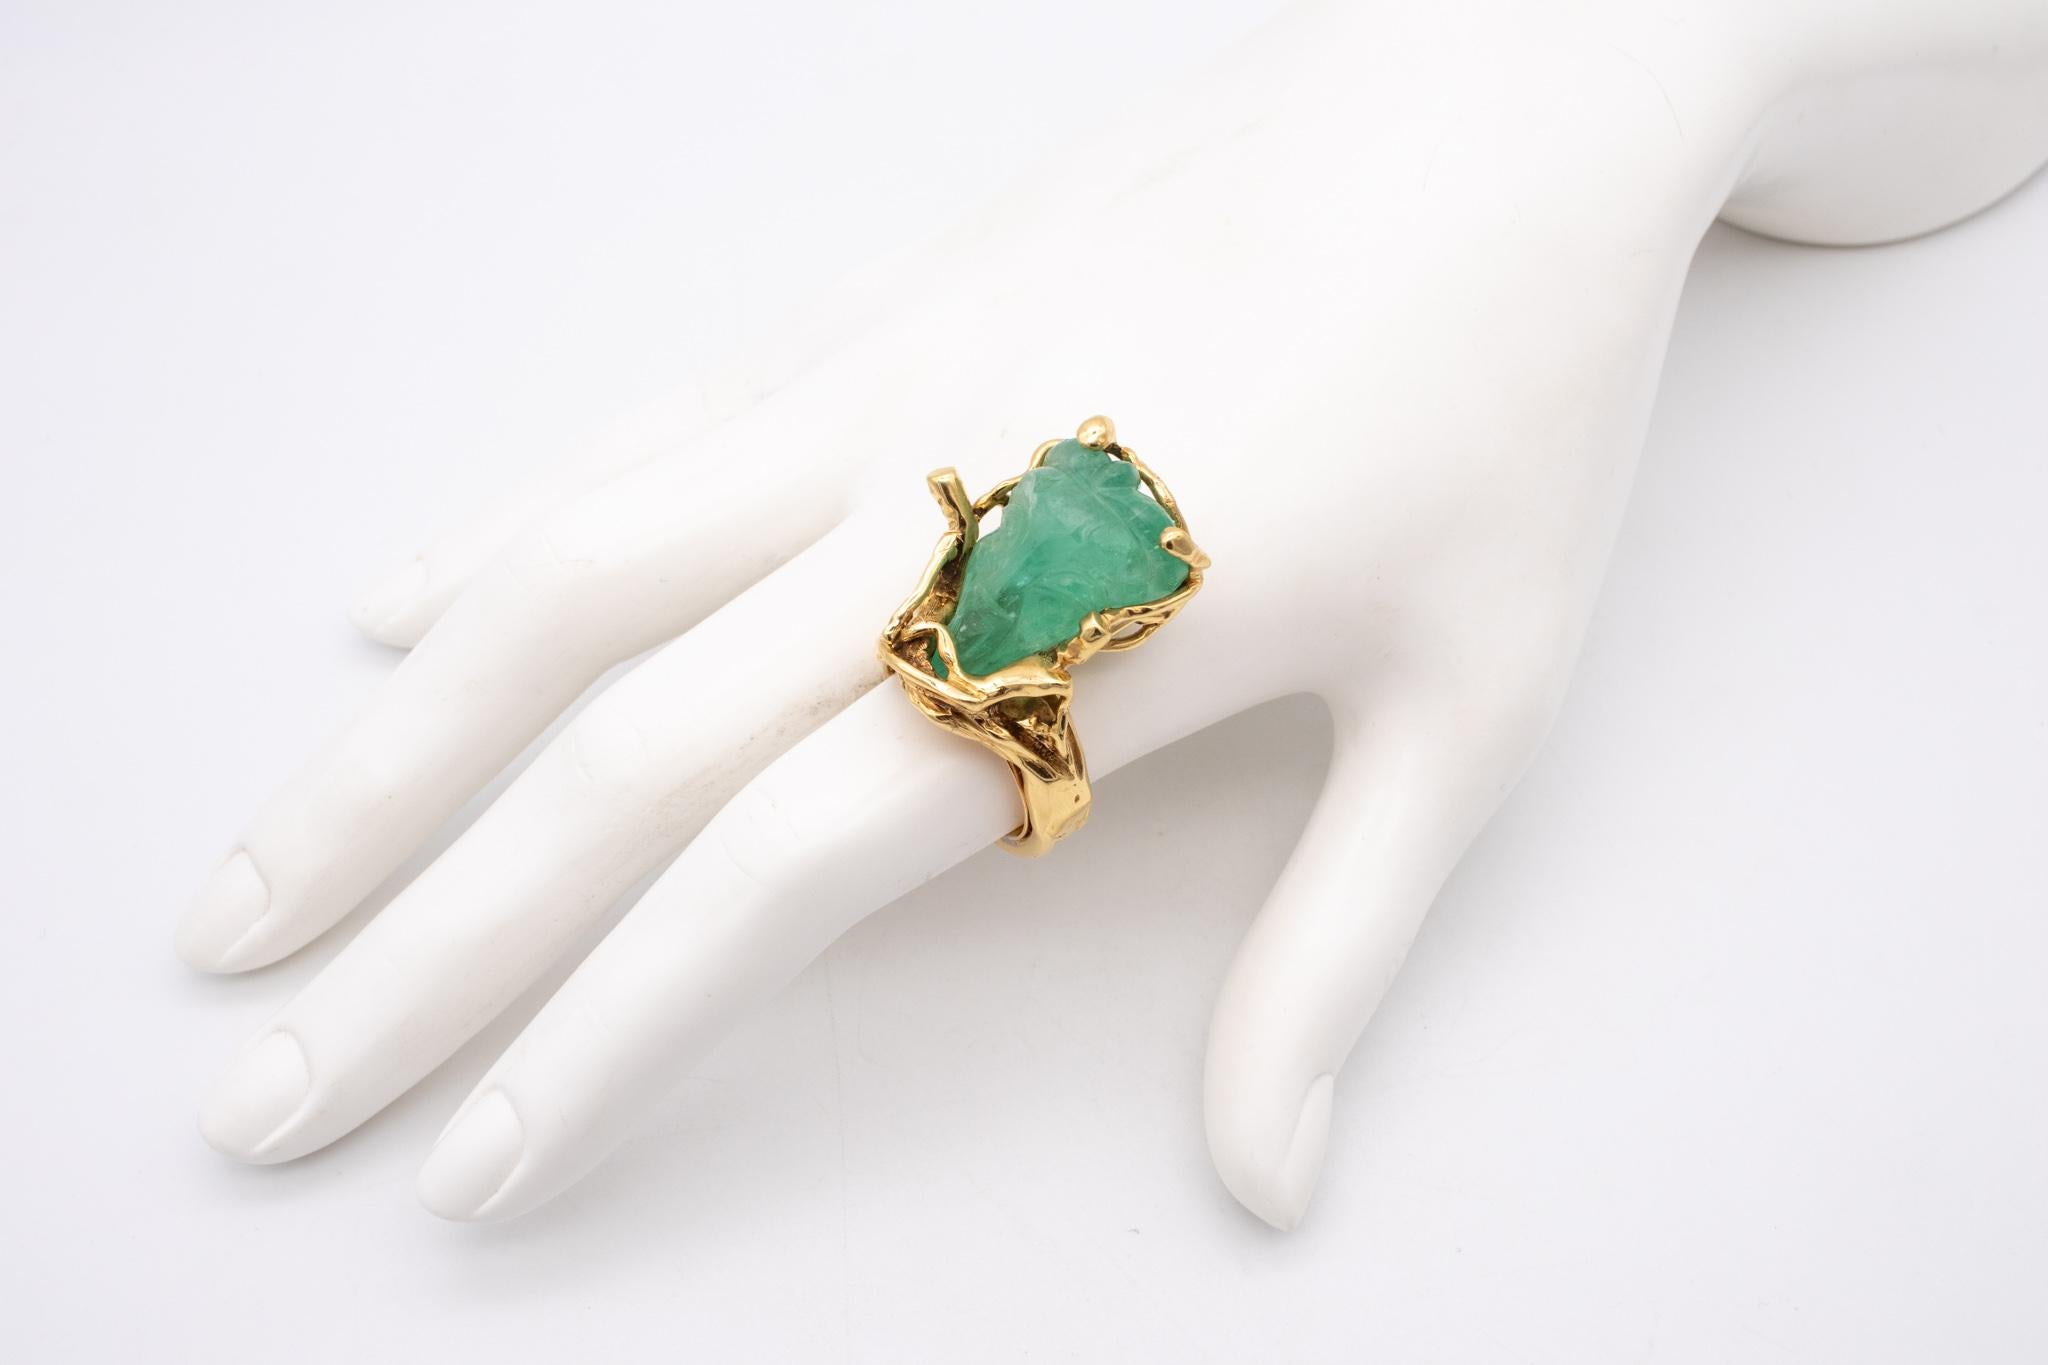 Mixed Cut Eric De Kolb 1960 Rare Statement Ring in 18Kt Gold with 28.53 Cts Carved Emerald